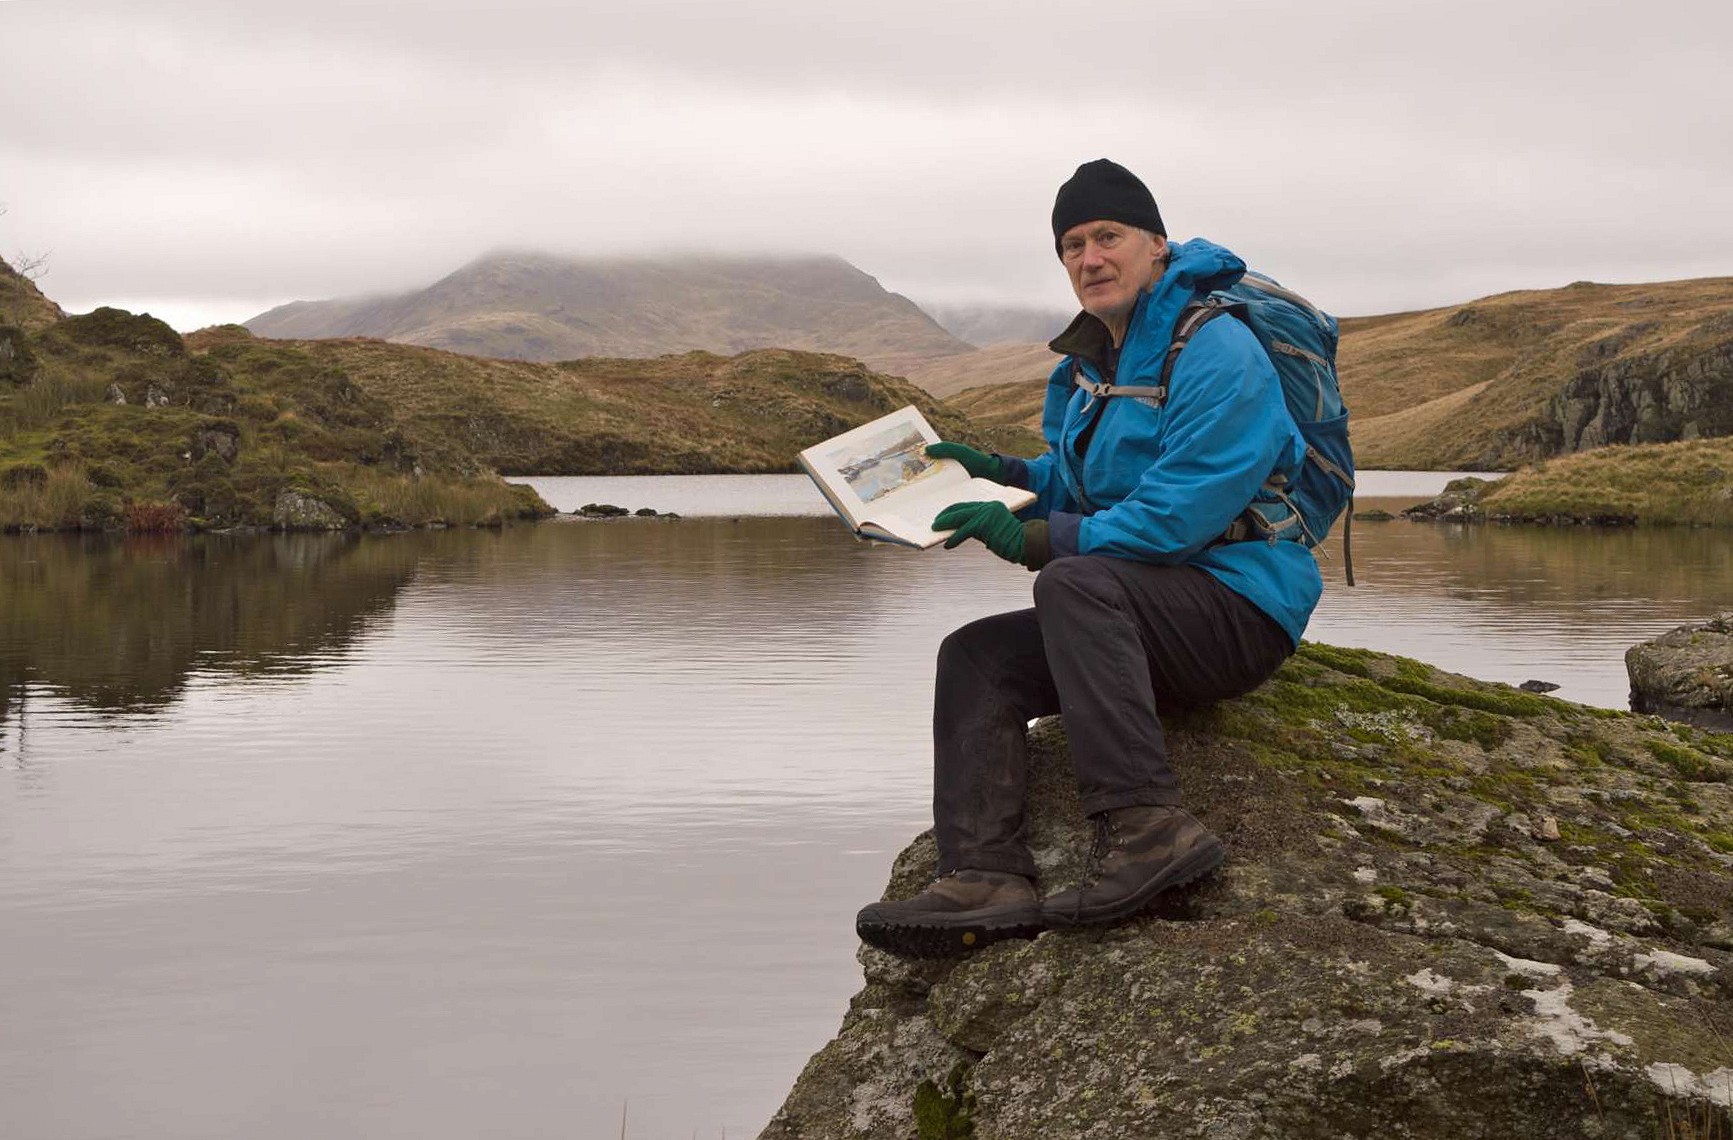 Attempting to reproduce an image from the book at Angle Tarn, Patterdale  © Ronald Turnbull